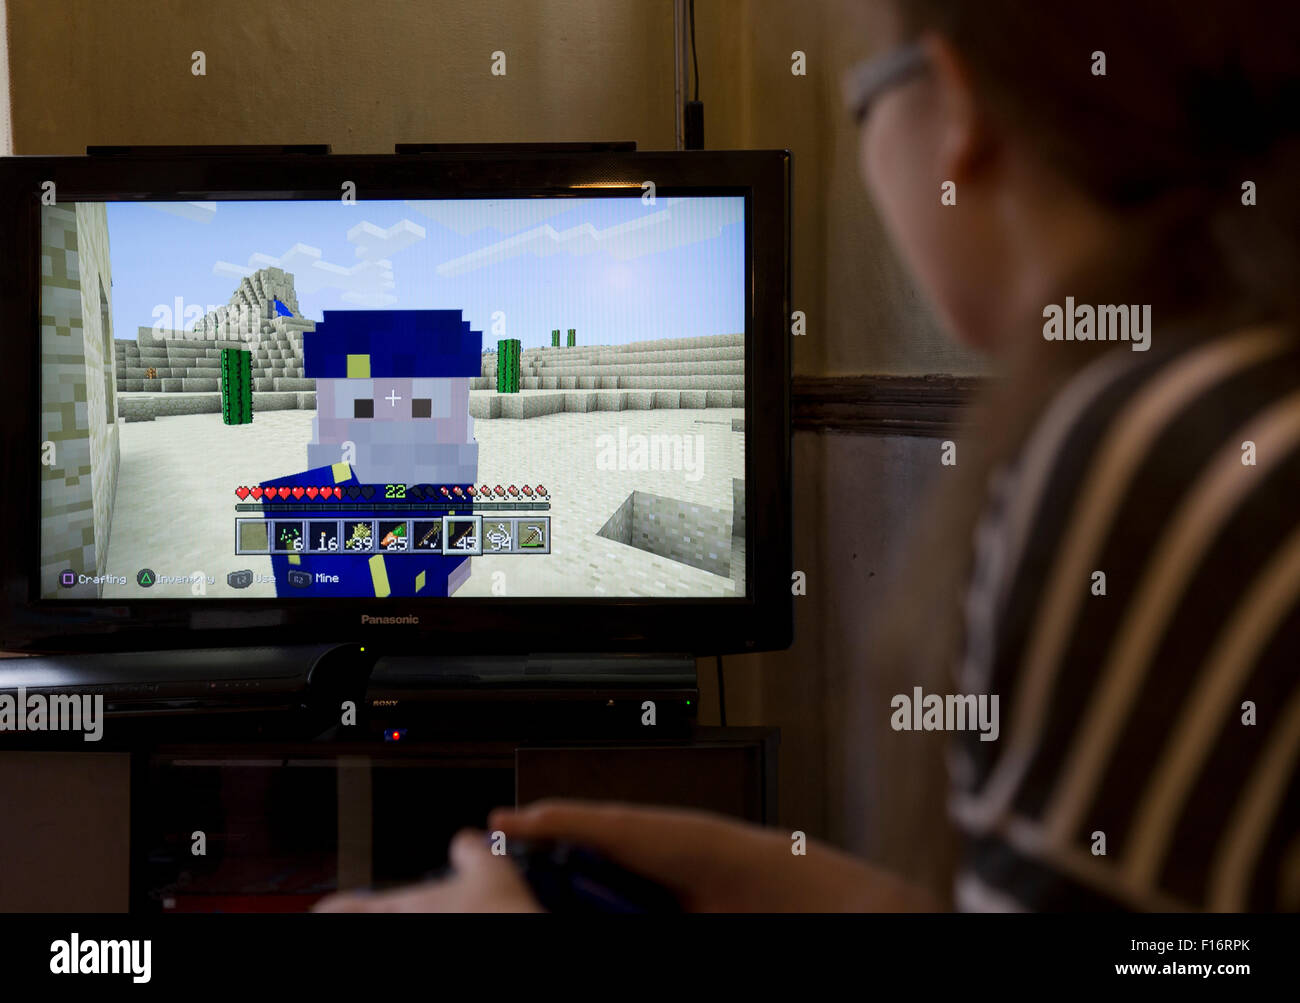 Teenage girl plays the video game Minecraft on a video consol Stock Photo